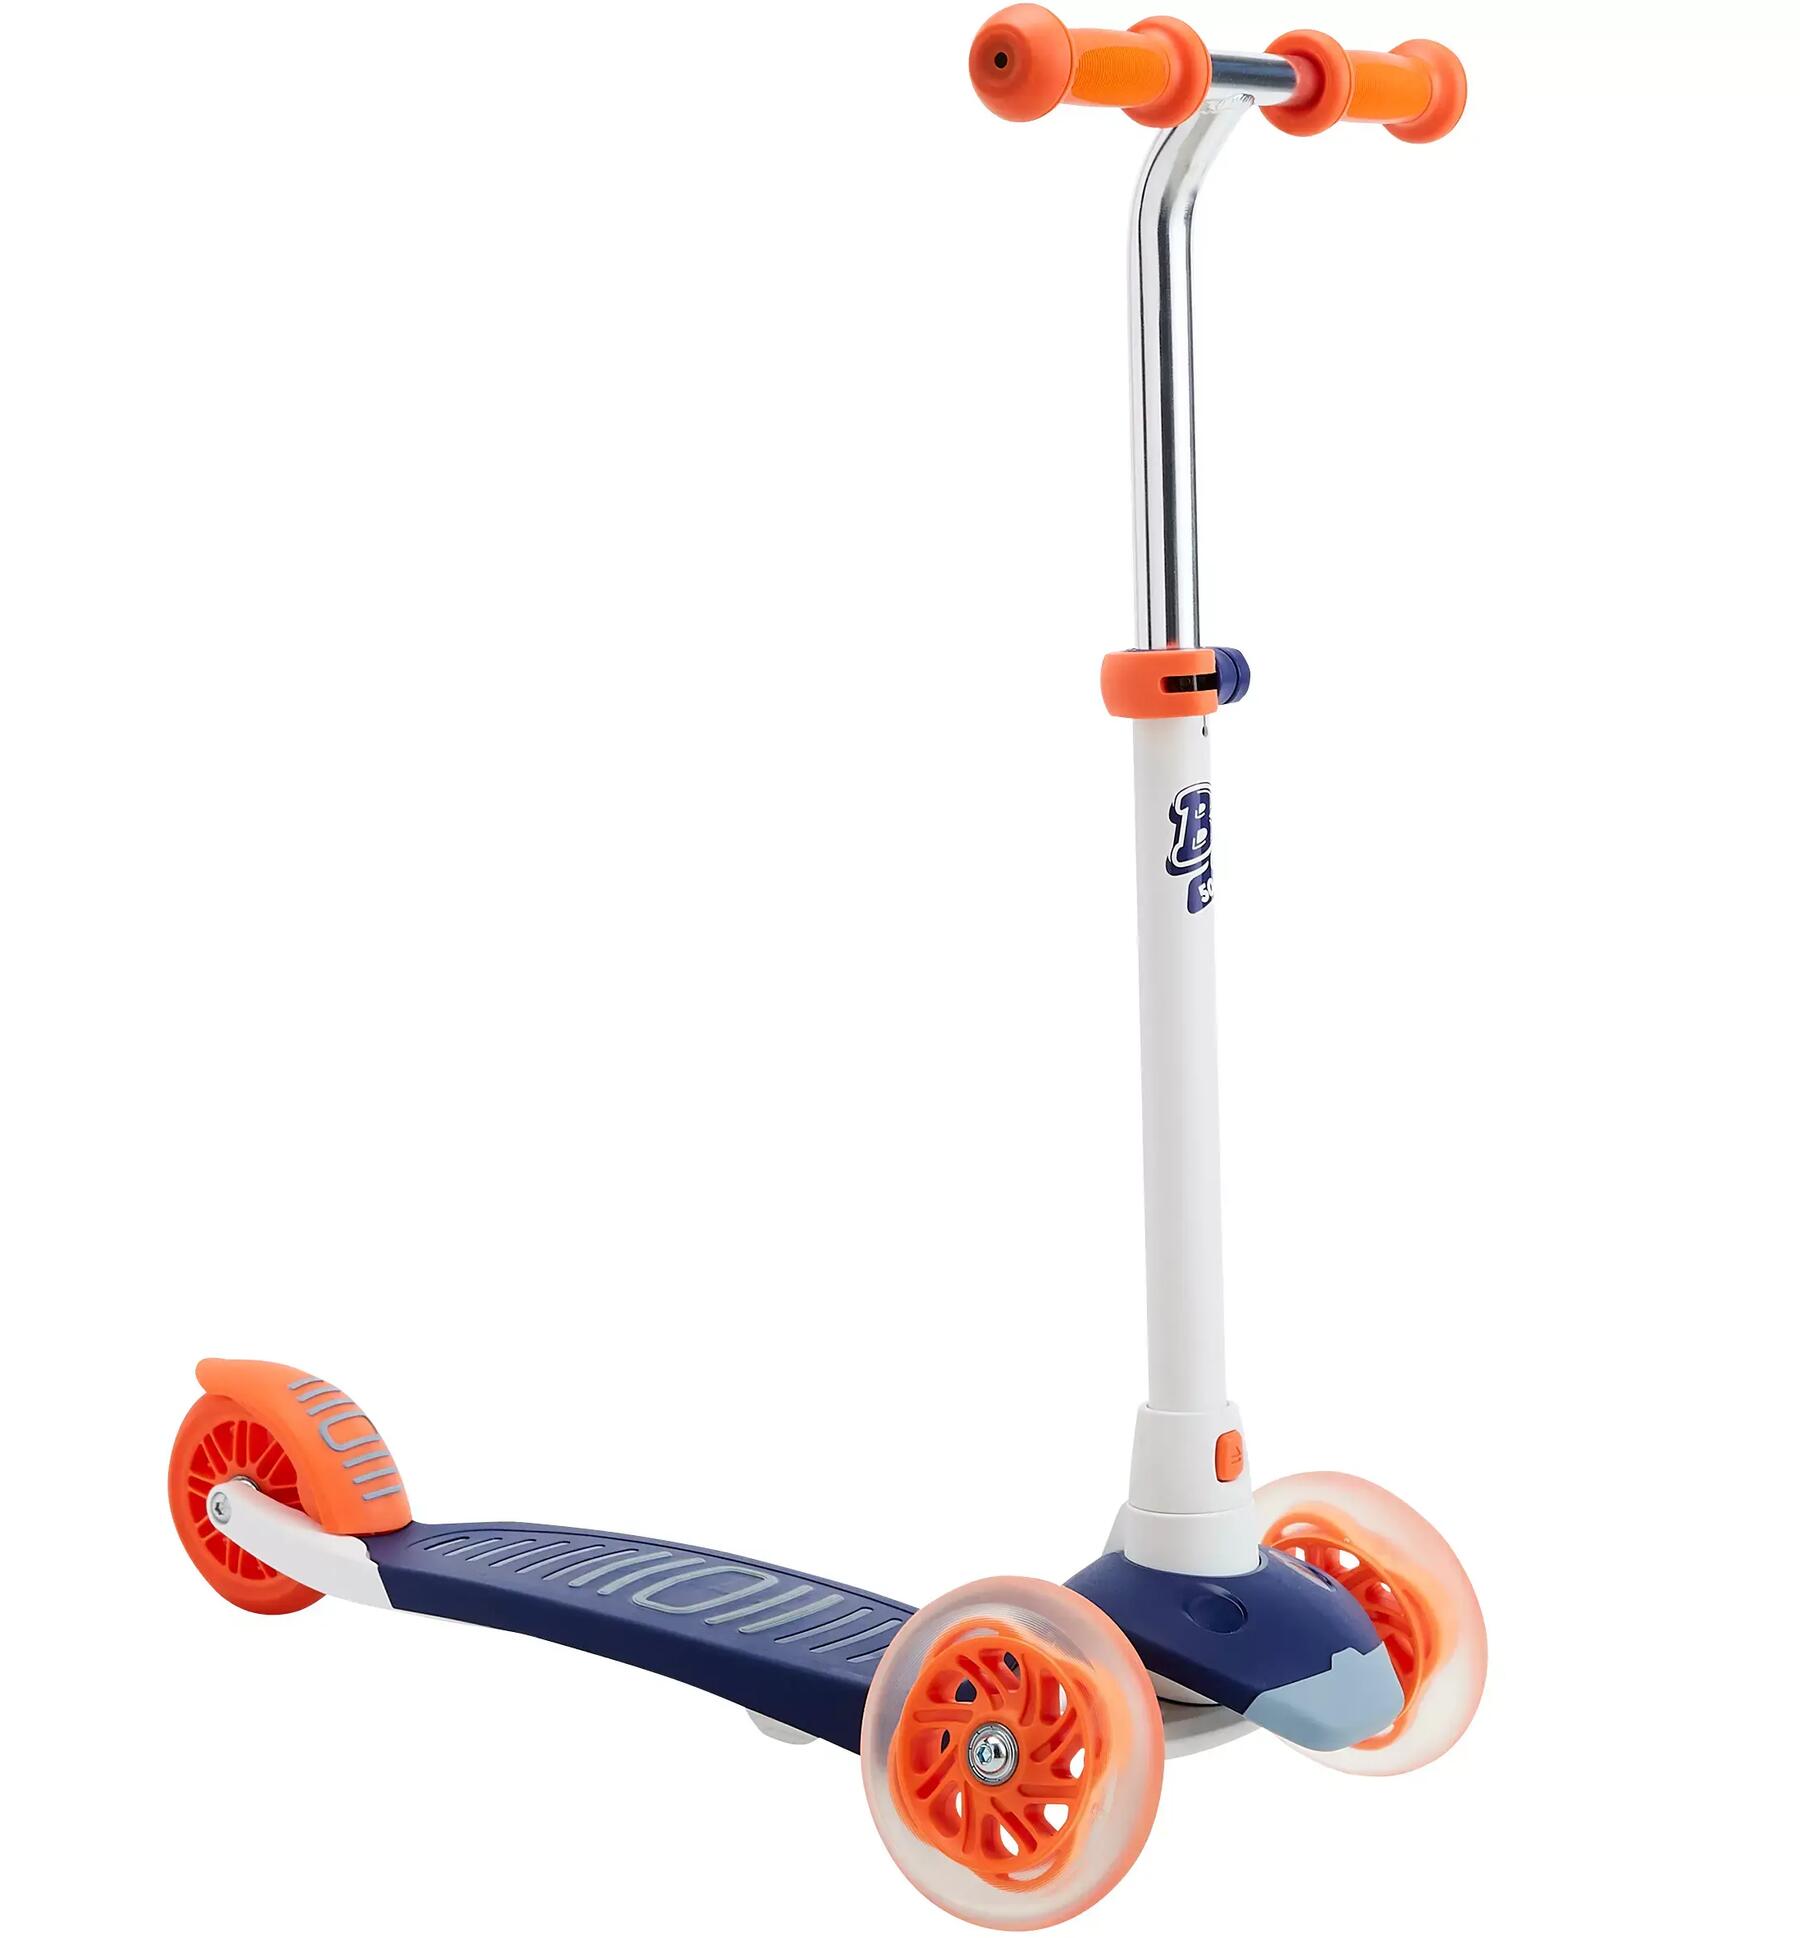 oxelo B1 500 Scooter